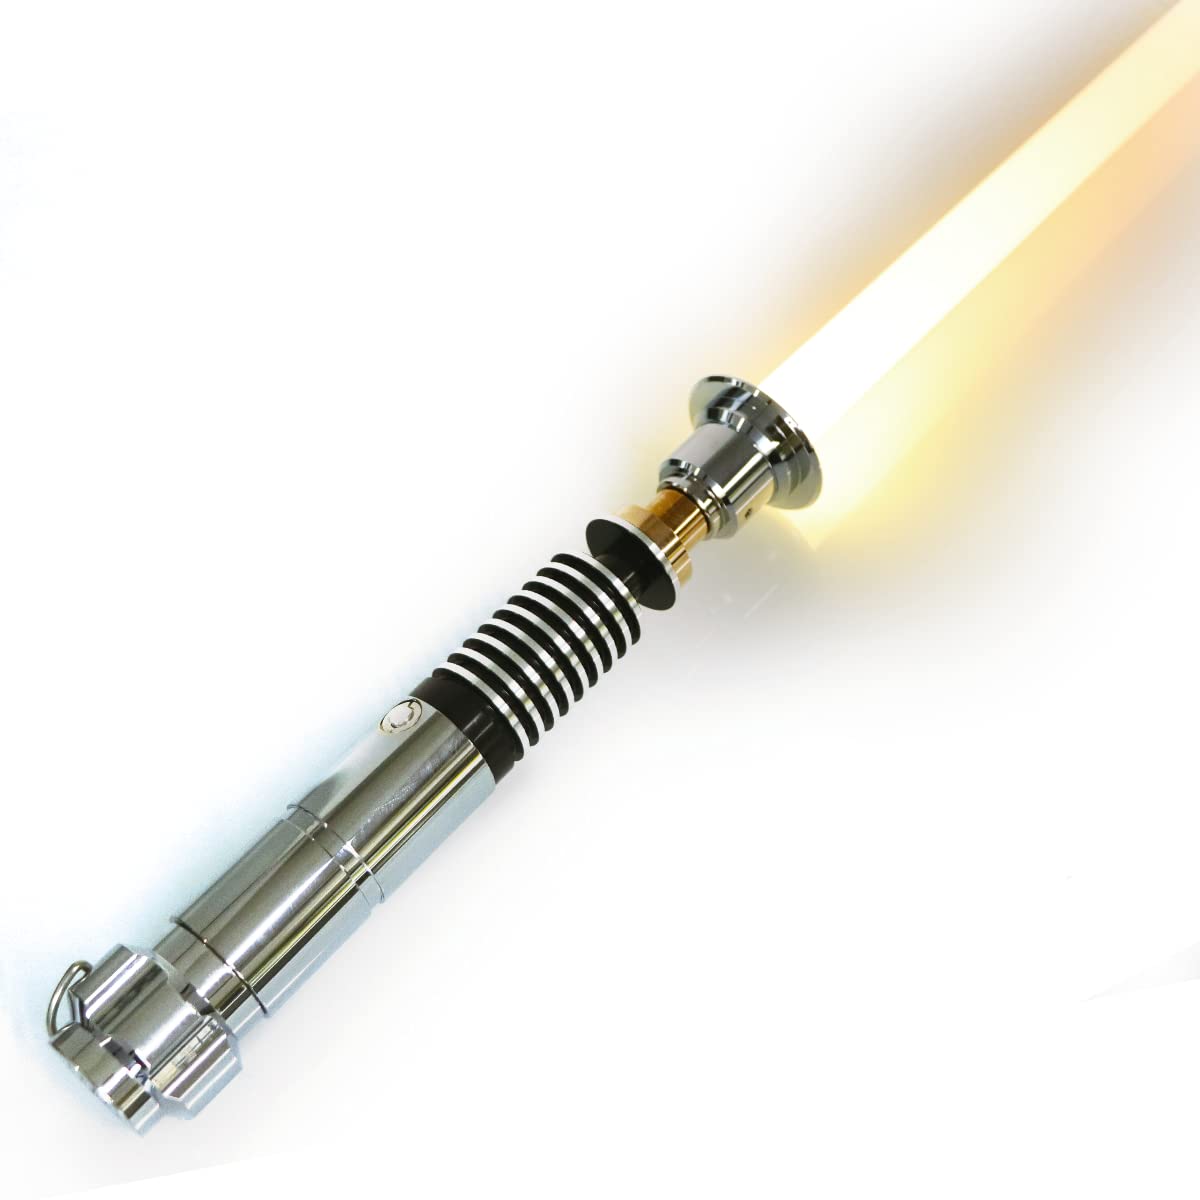 ZIASABERS RGB Lightsaber - Light Saber with Realistic Metal Hilt - Real Light Sabers - Dueling Saber with Smooth Swing Motion Control (from Our Character Inspired Lightsabers Collection)